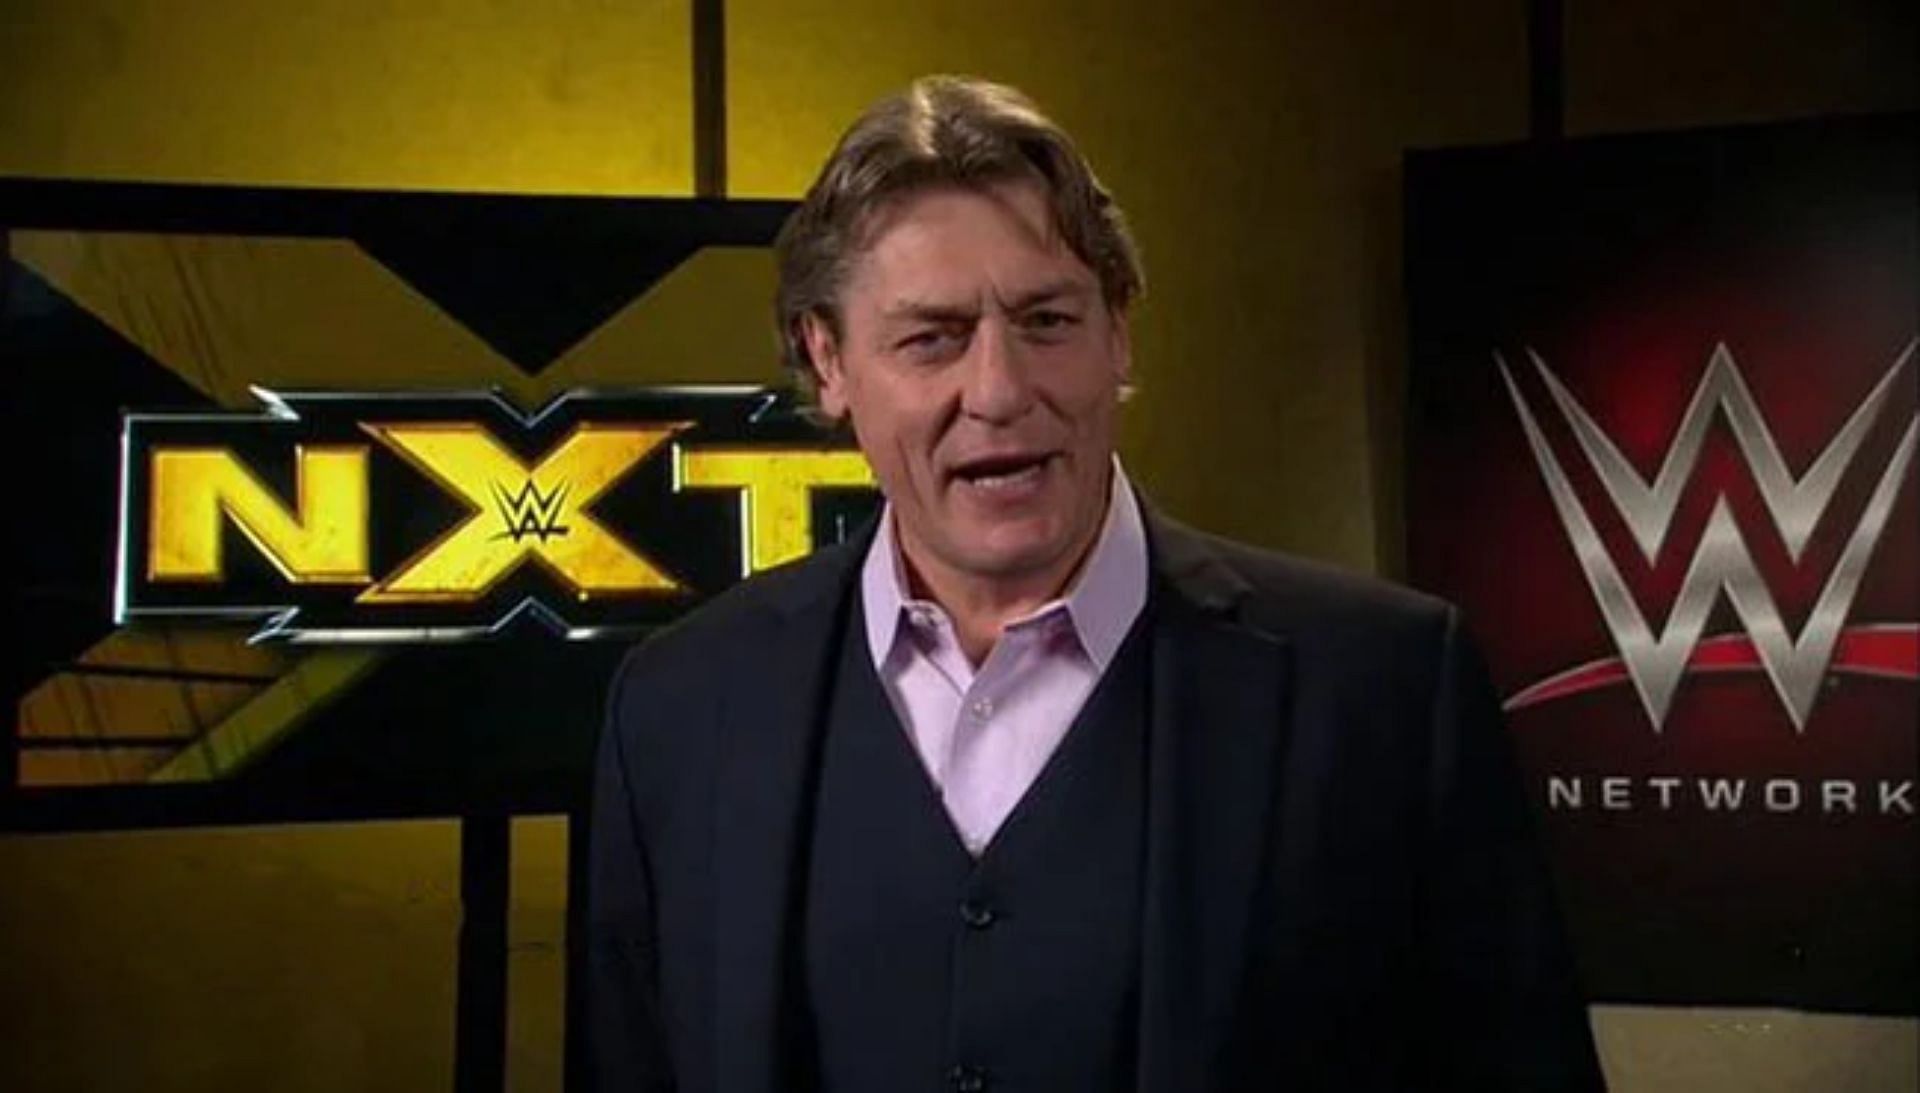 William Regal served as NXT GM for over 7 years